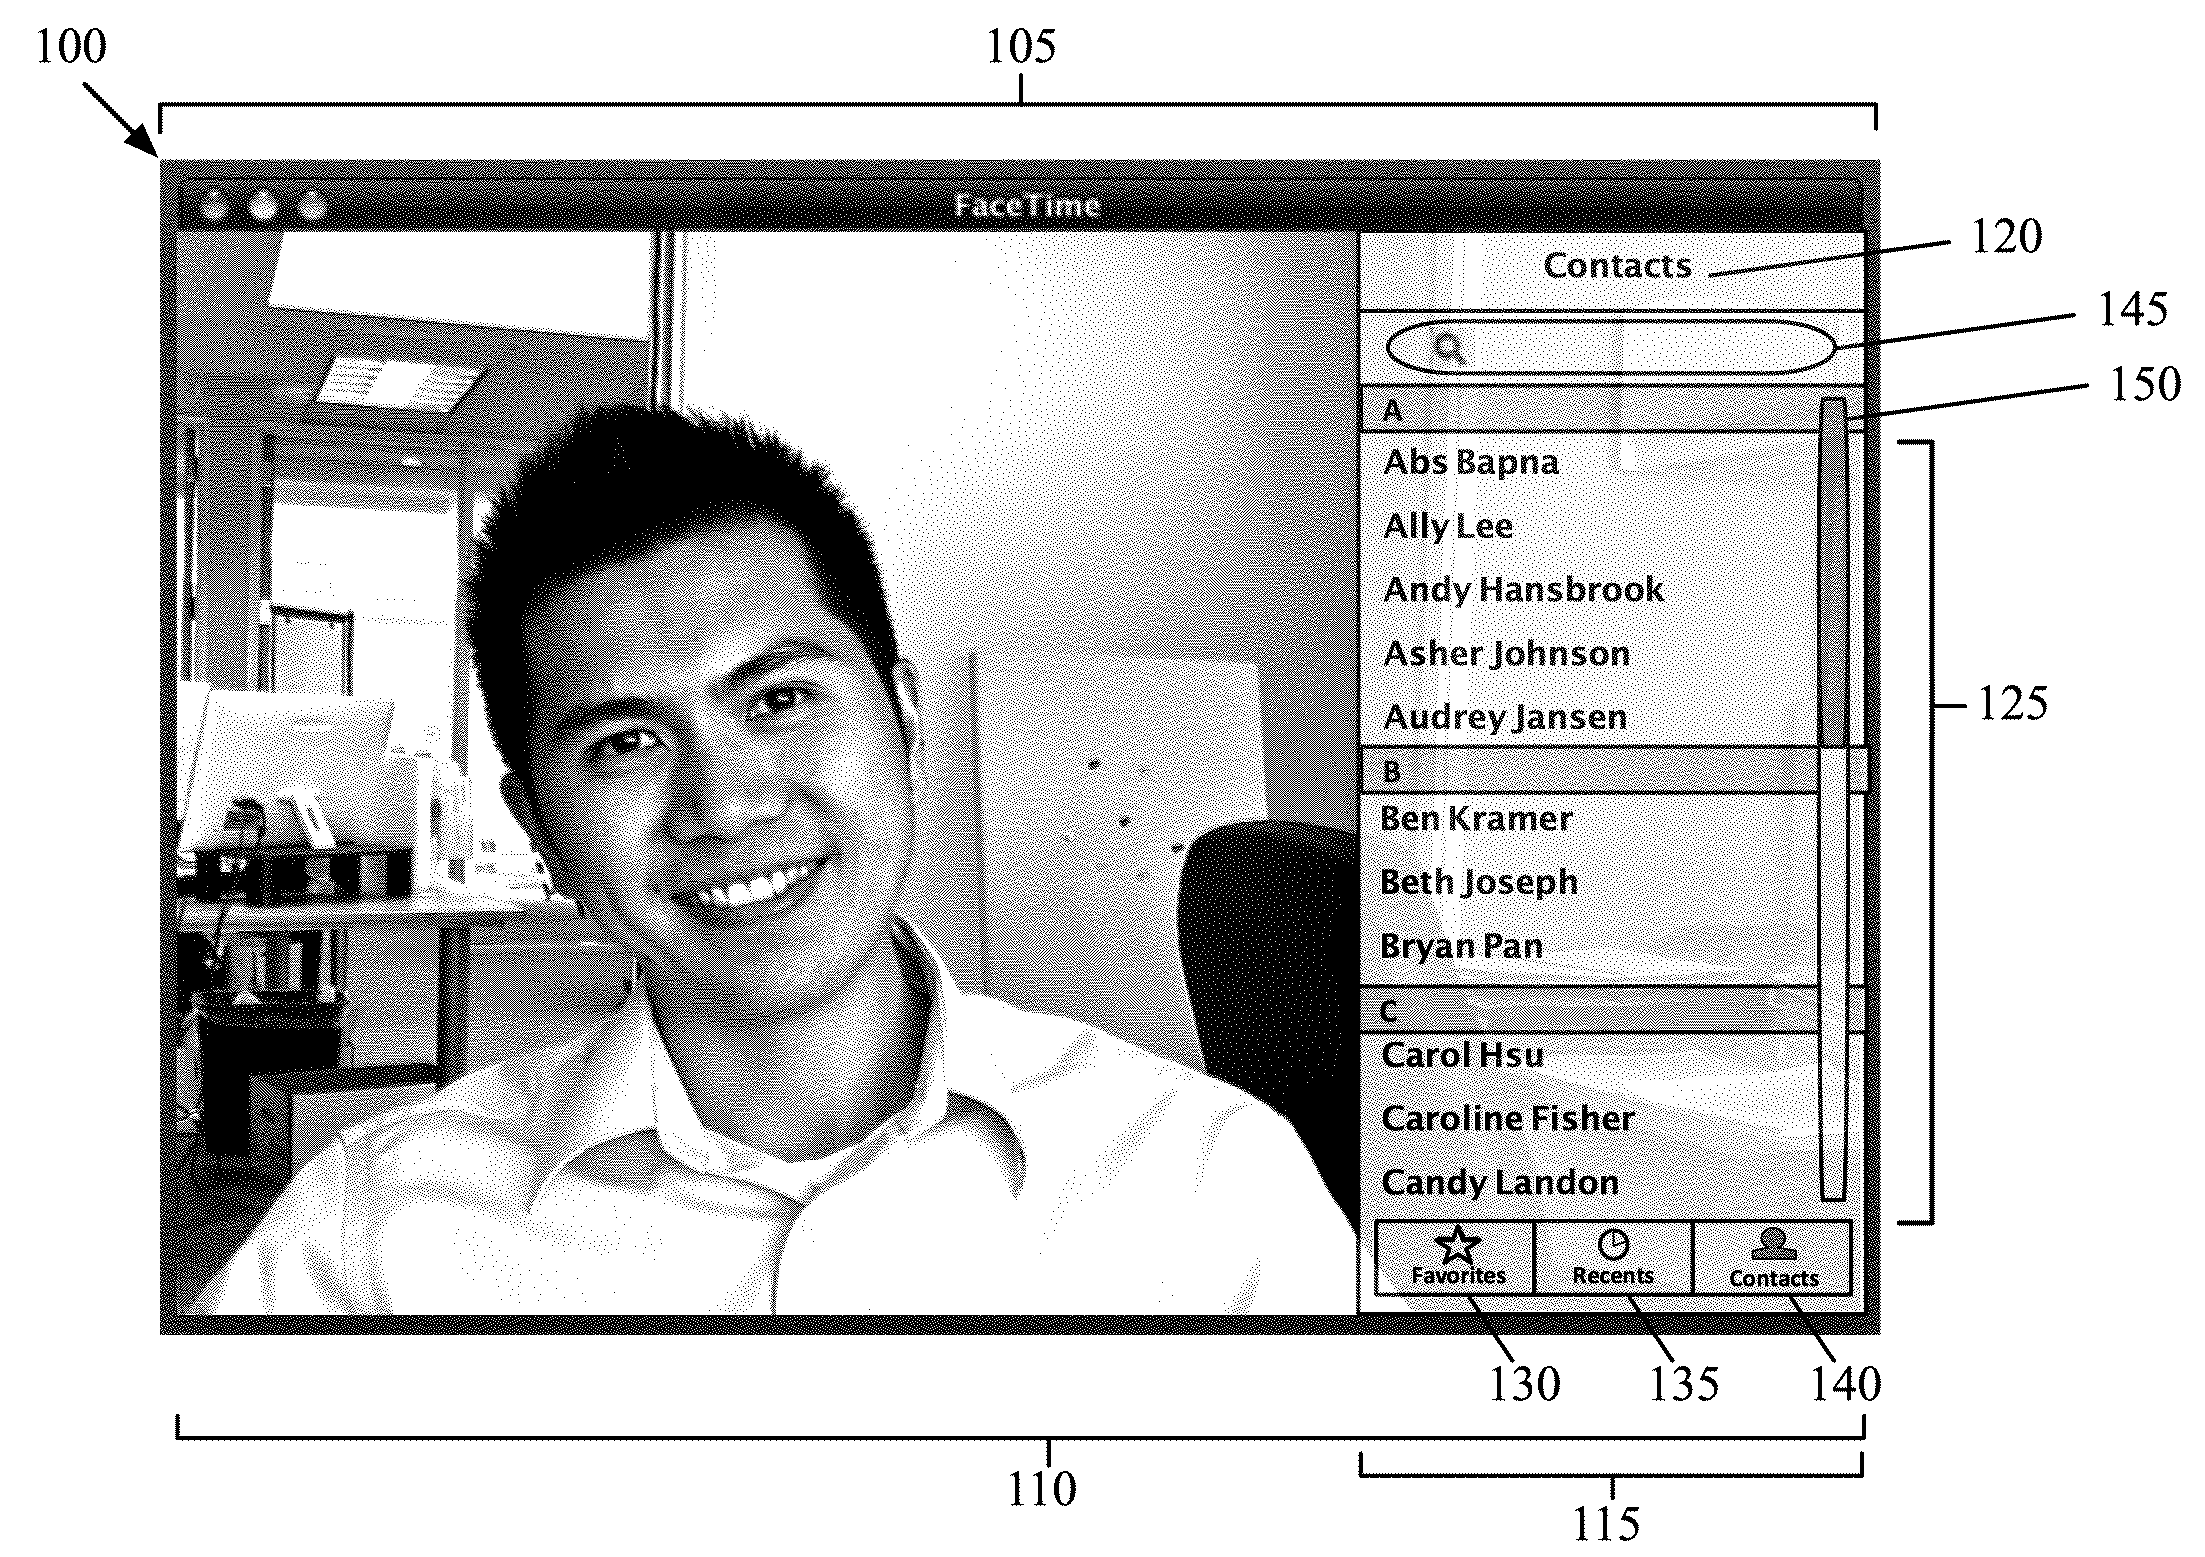 Overlay for a Video Conferencing Application